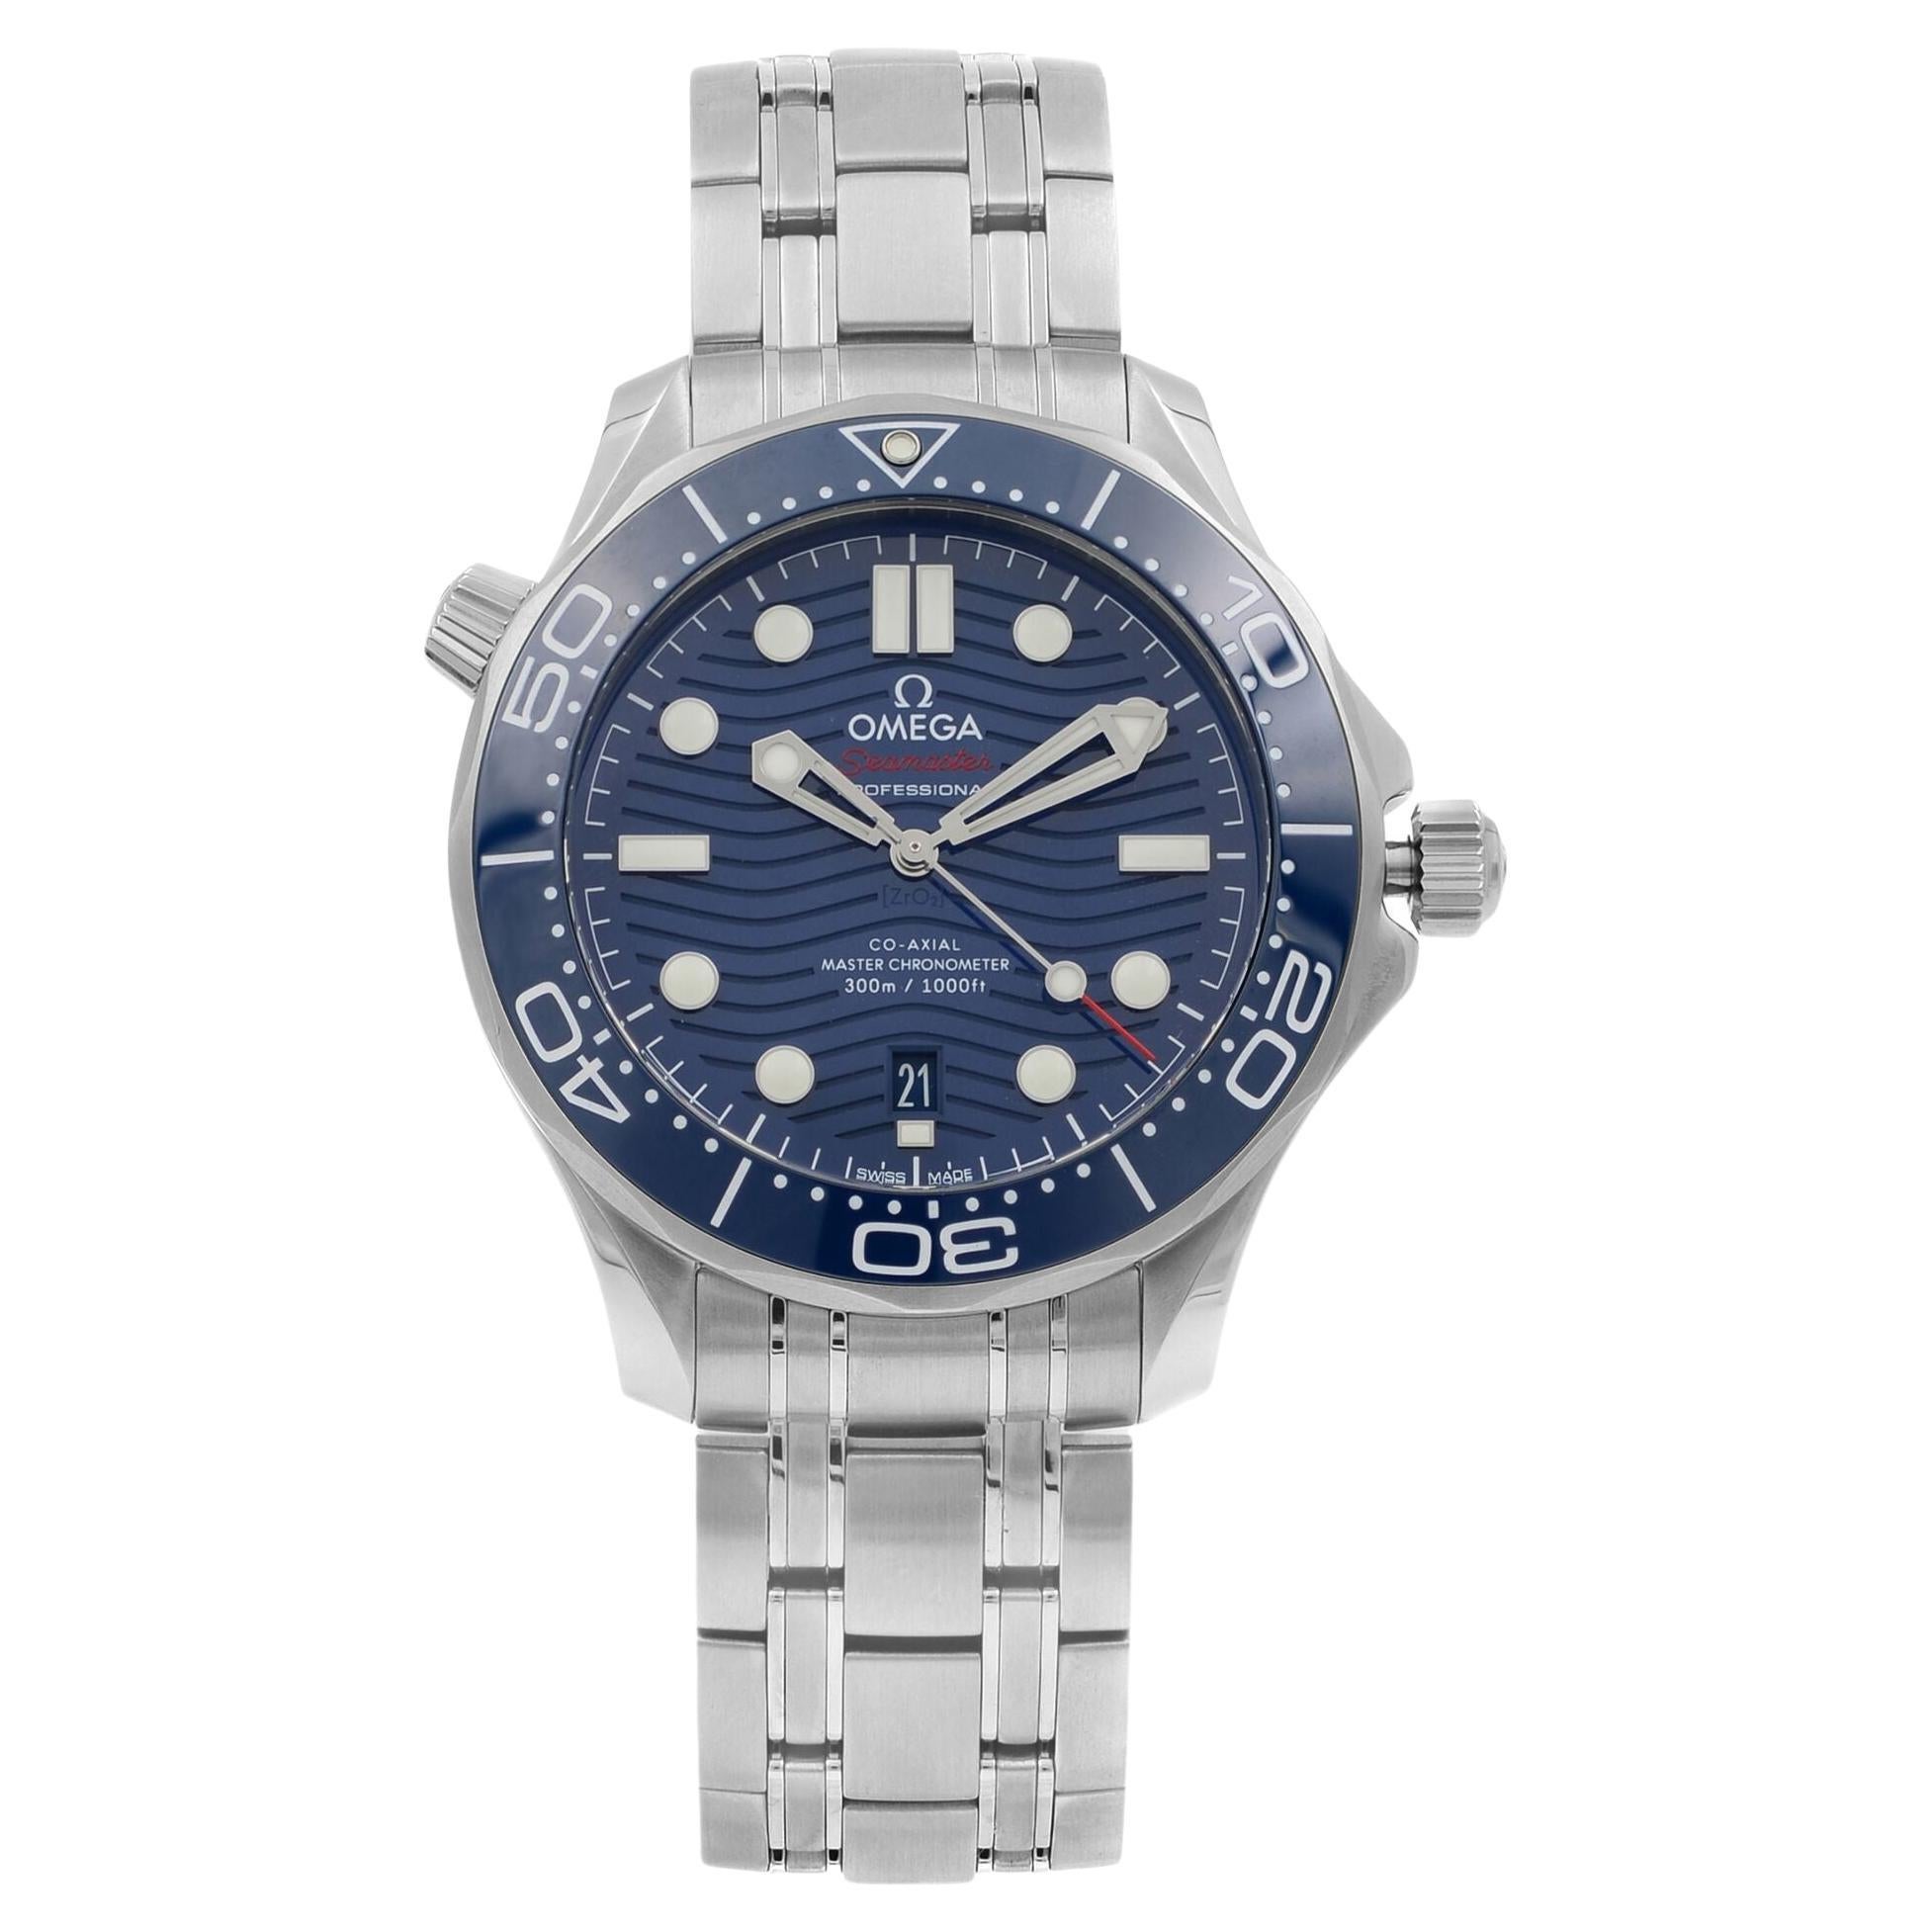 Omega Seamaster Diver 300m Steel Blue Dial Mens Watch 210.30.42.20.03.001 For Sale